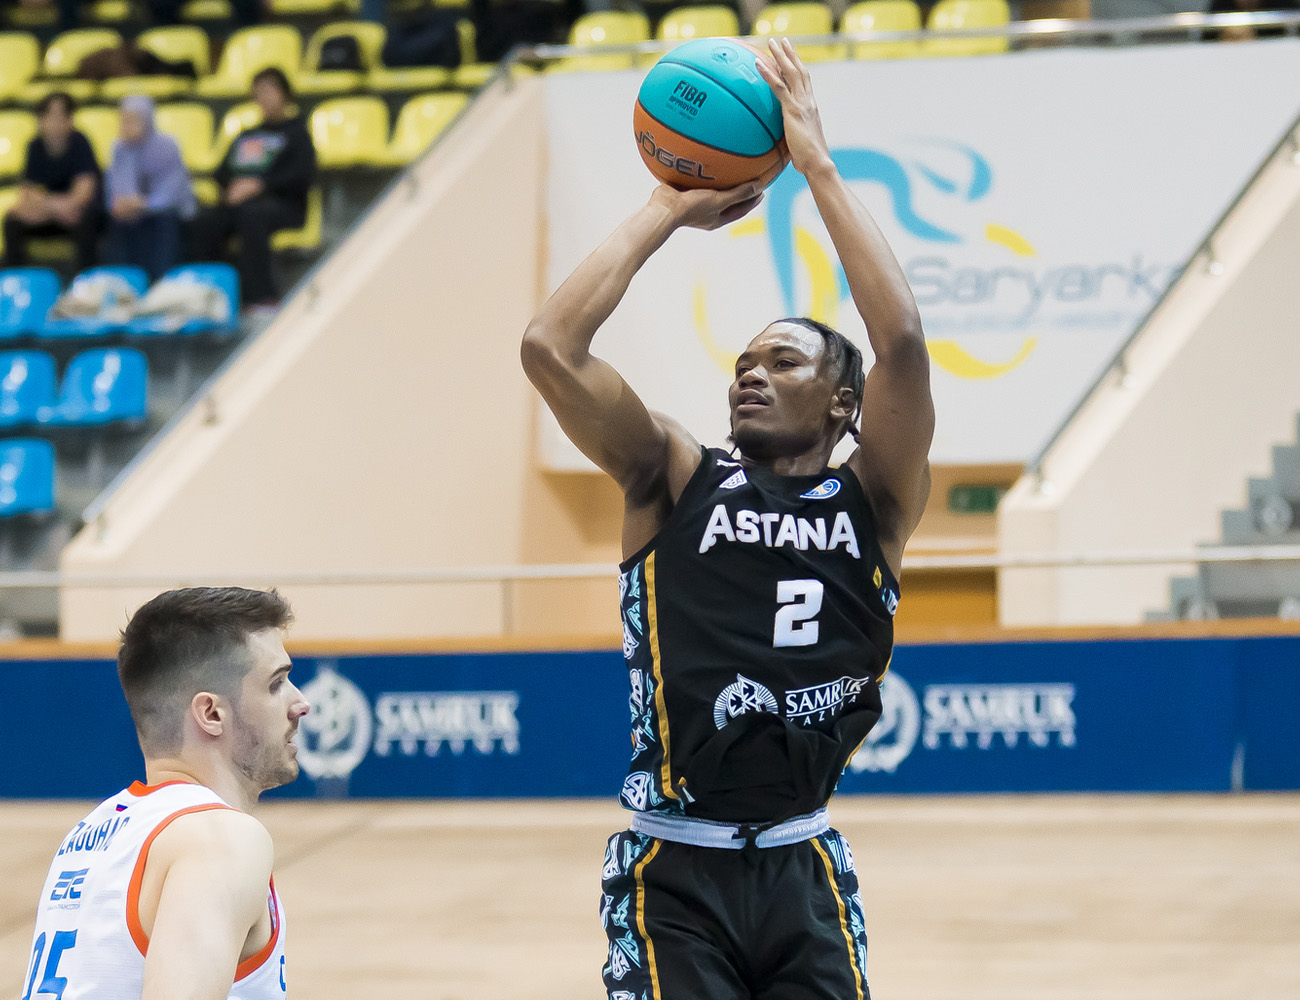 Markell Johnson’s 39 points helped Astana to get win over Samara in overtime